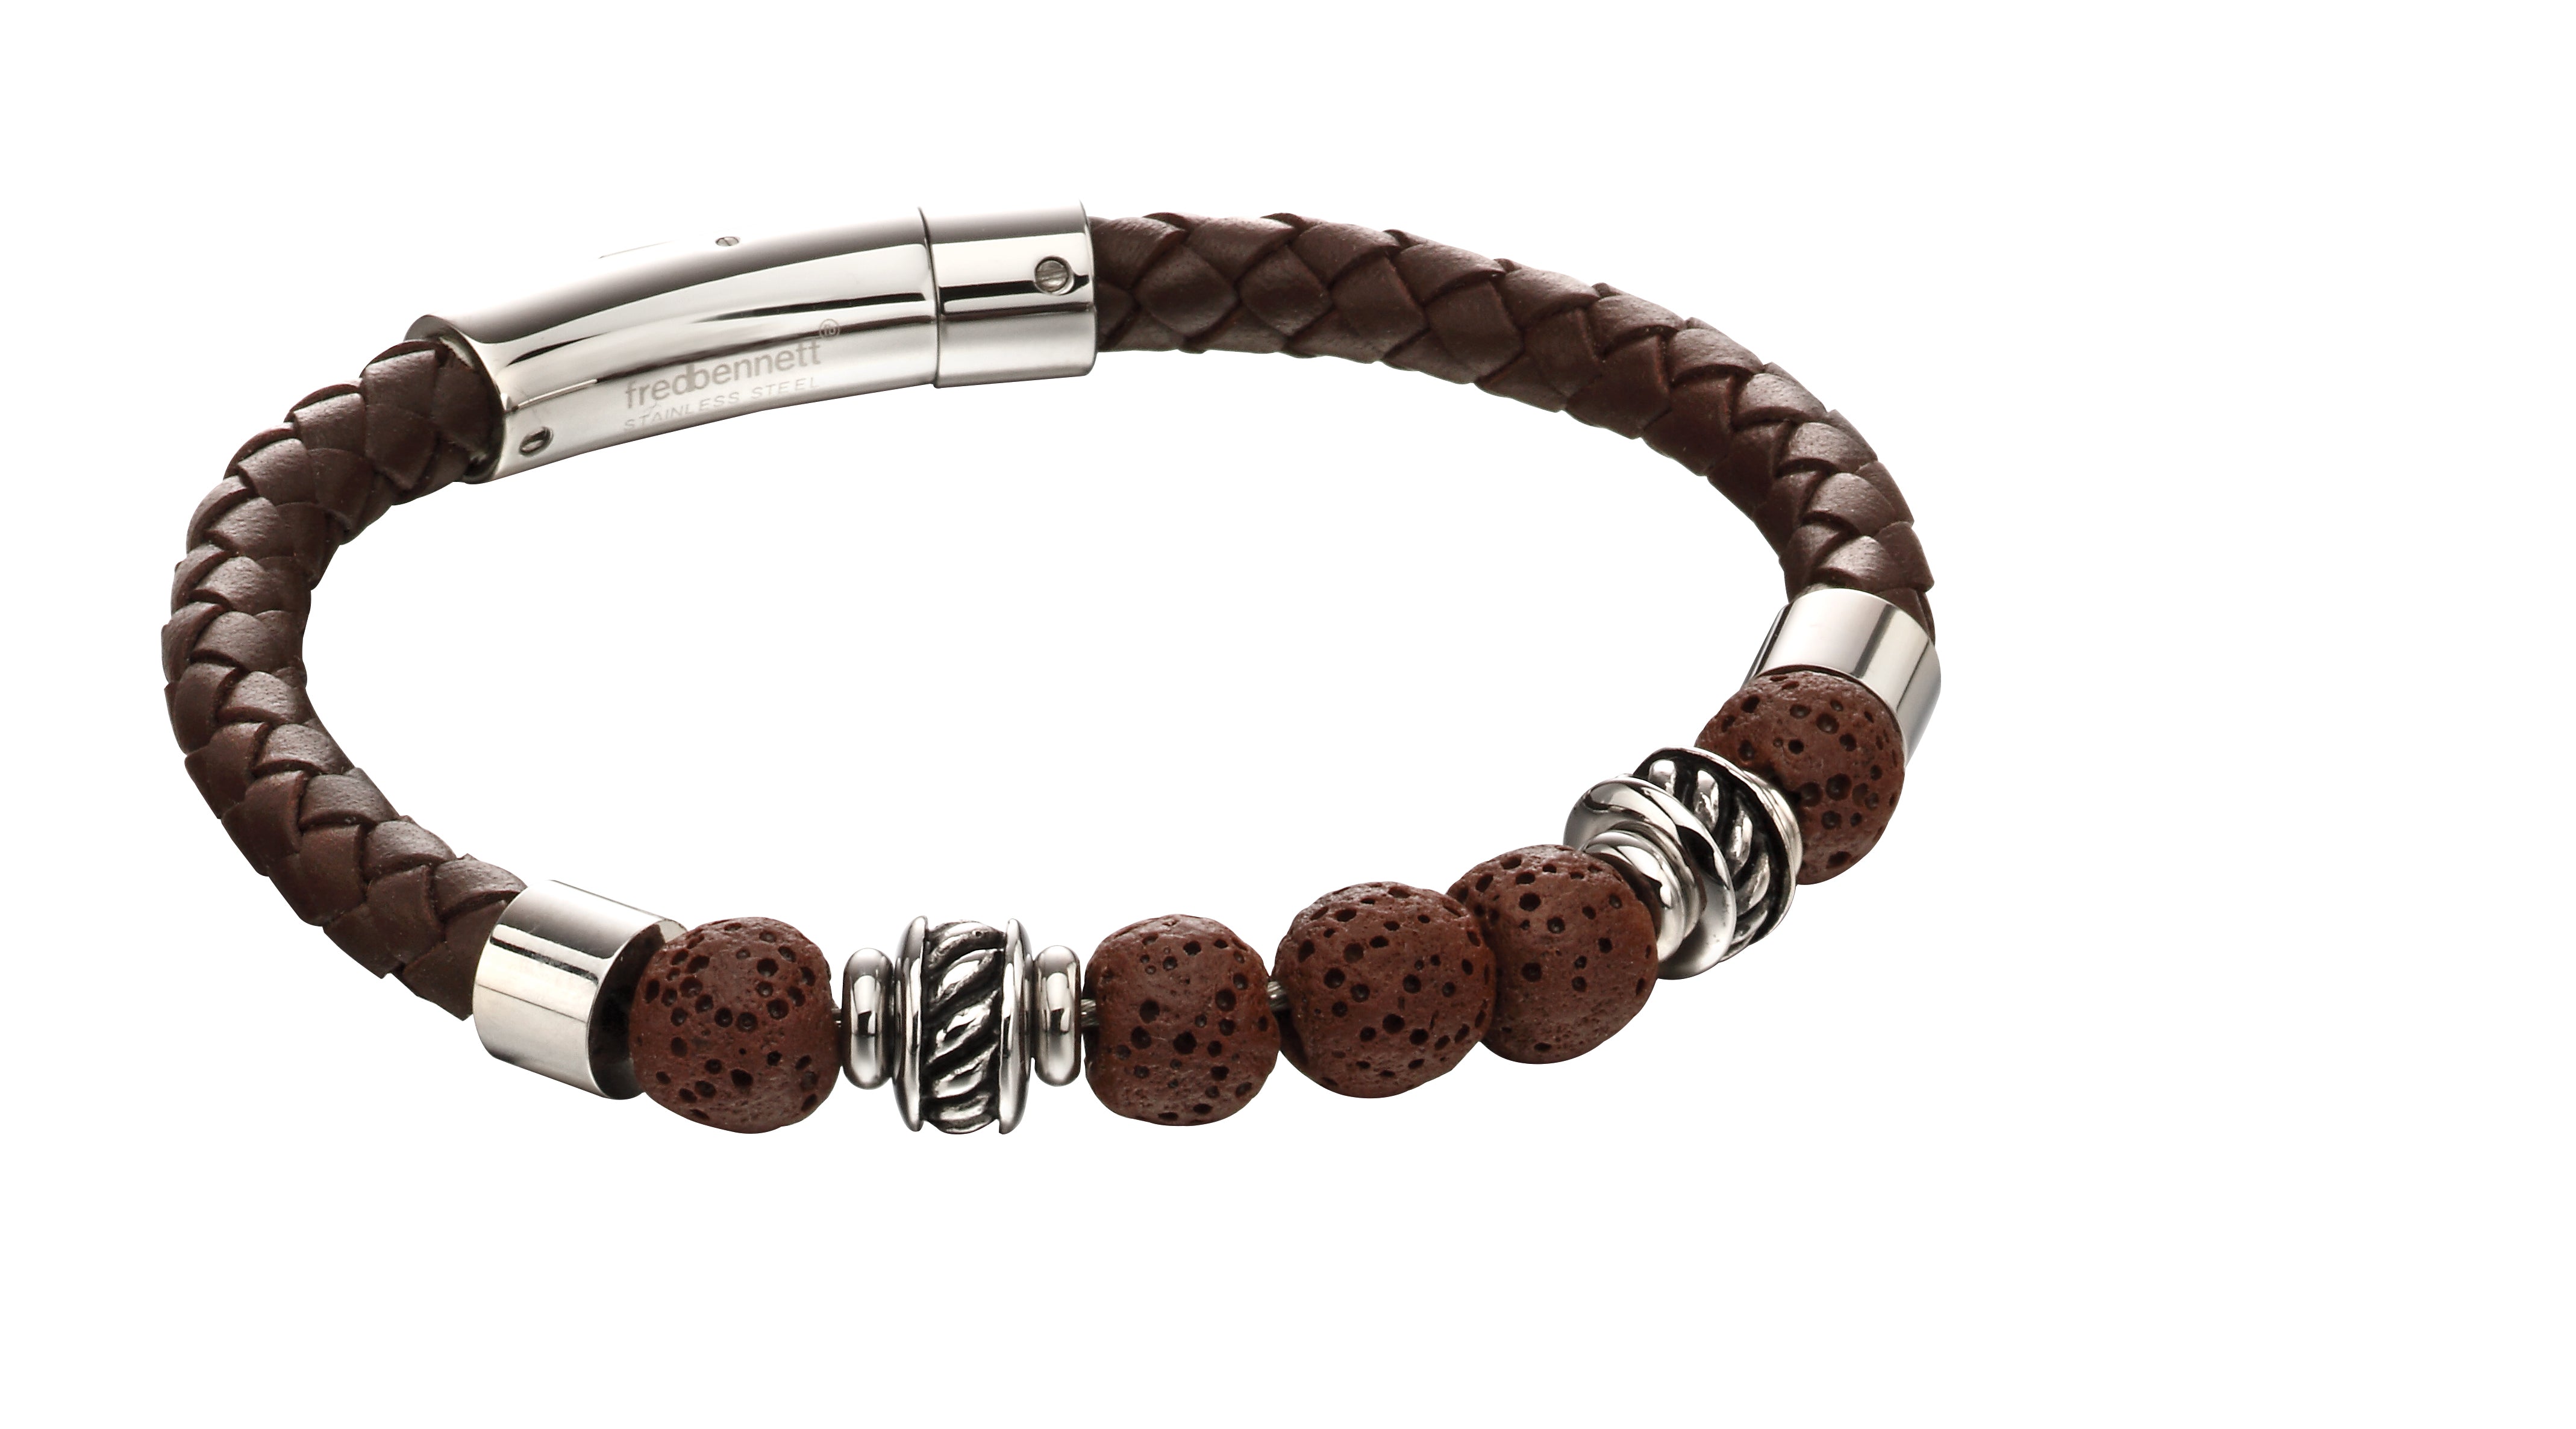 Stainless Steel & Brown Leather with Lava Stones Bracelet - FB0001 - Hallmark Jewellers Formby & The Jewellers Bench Widnes